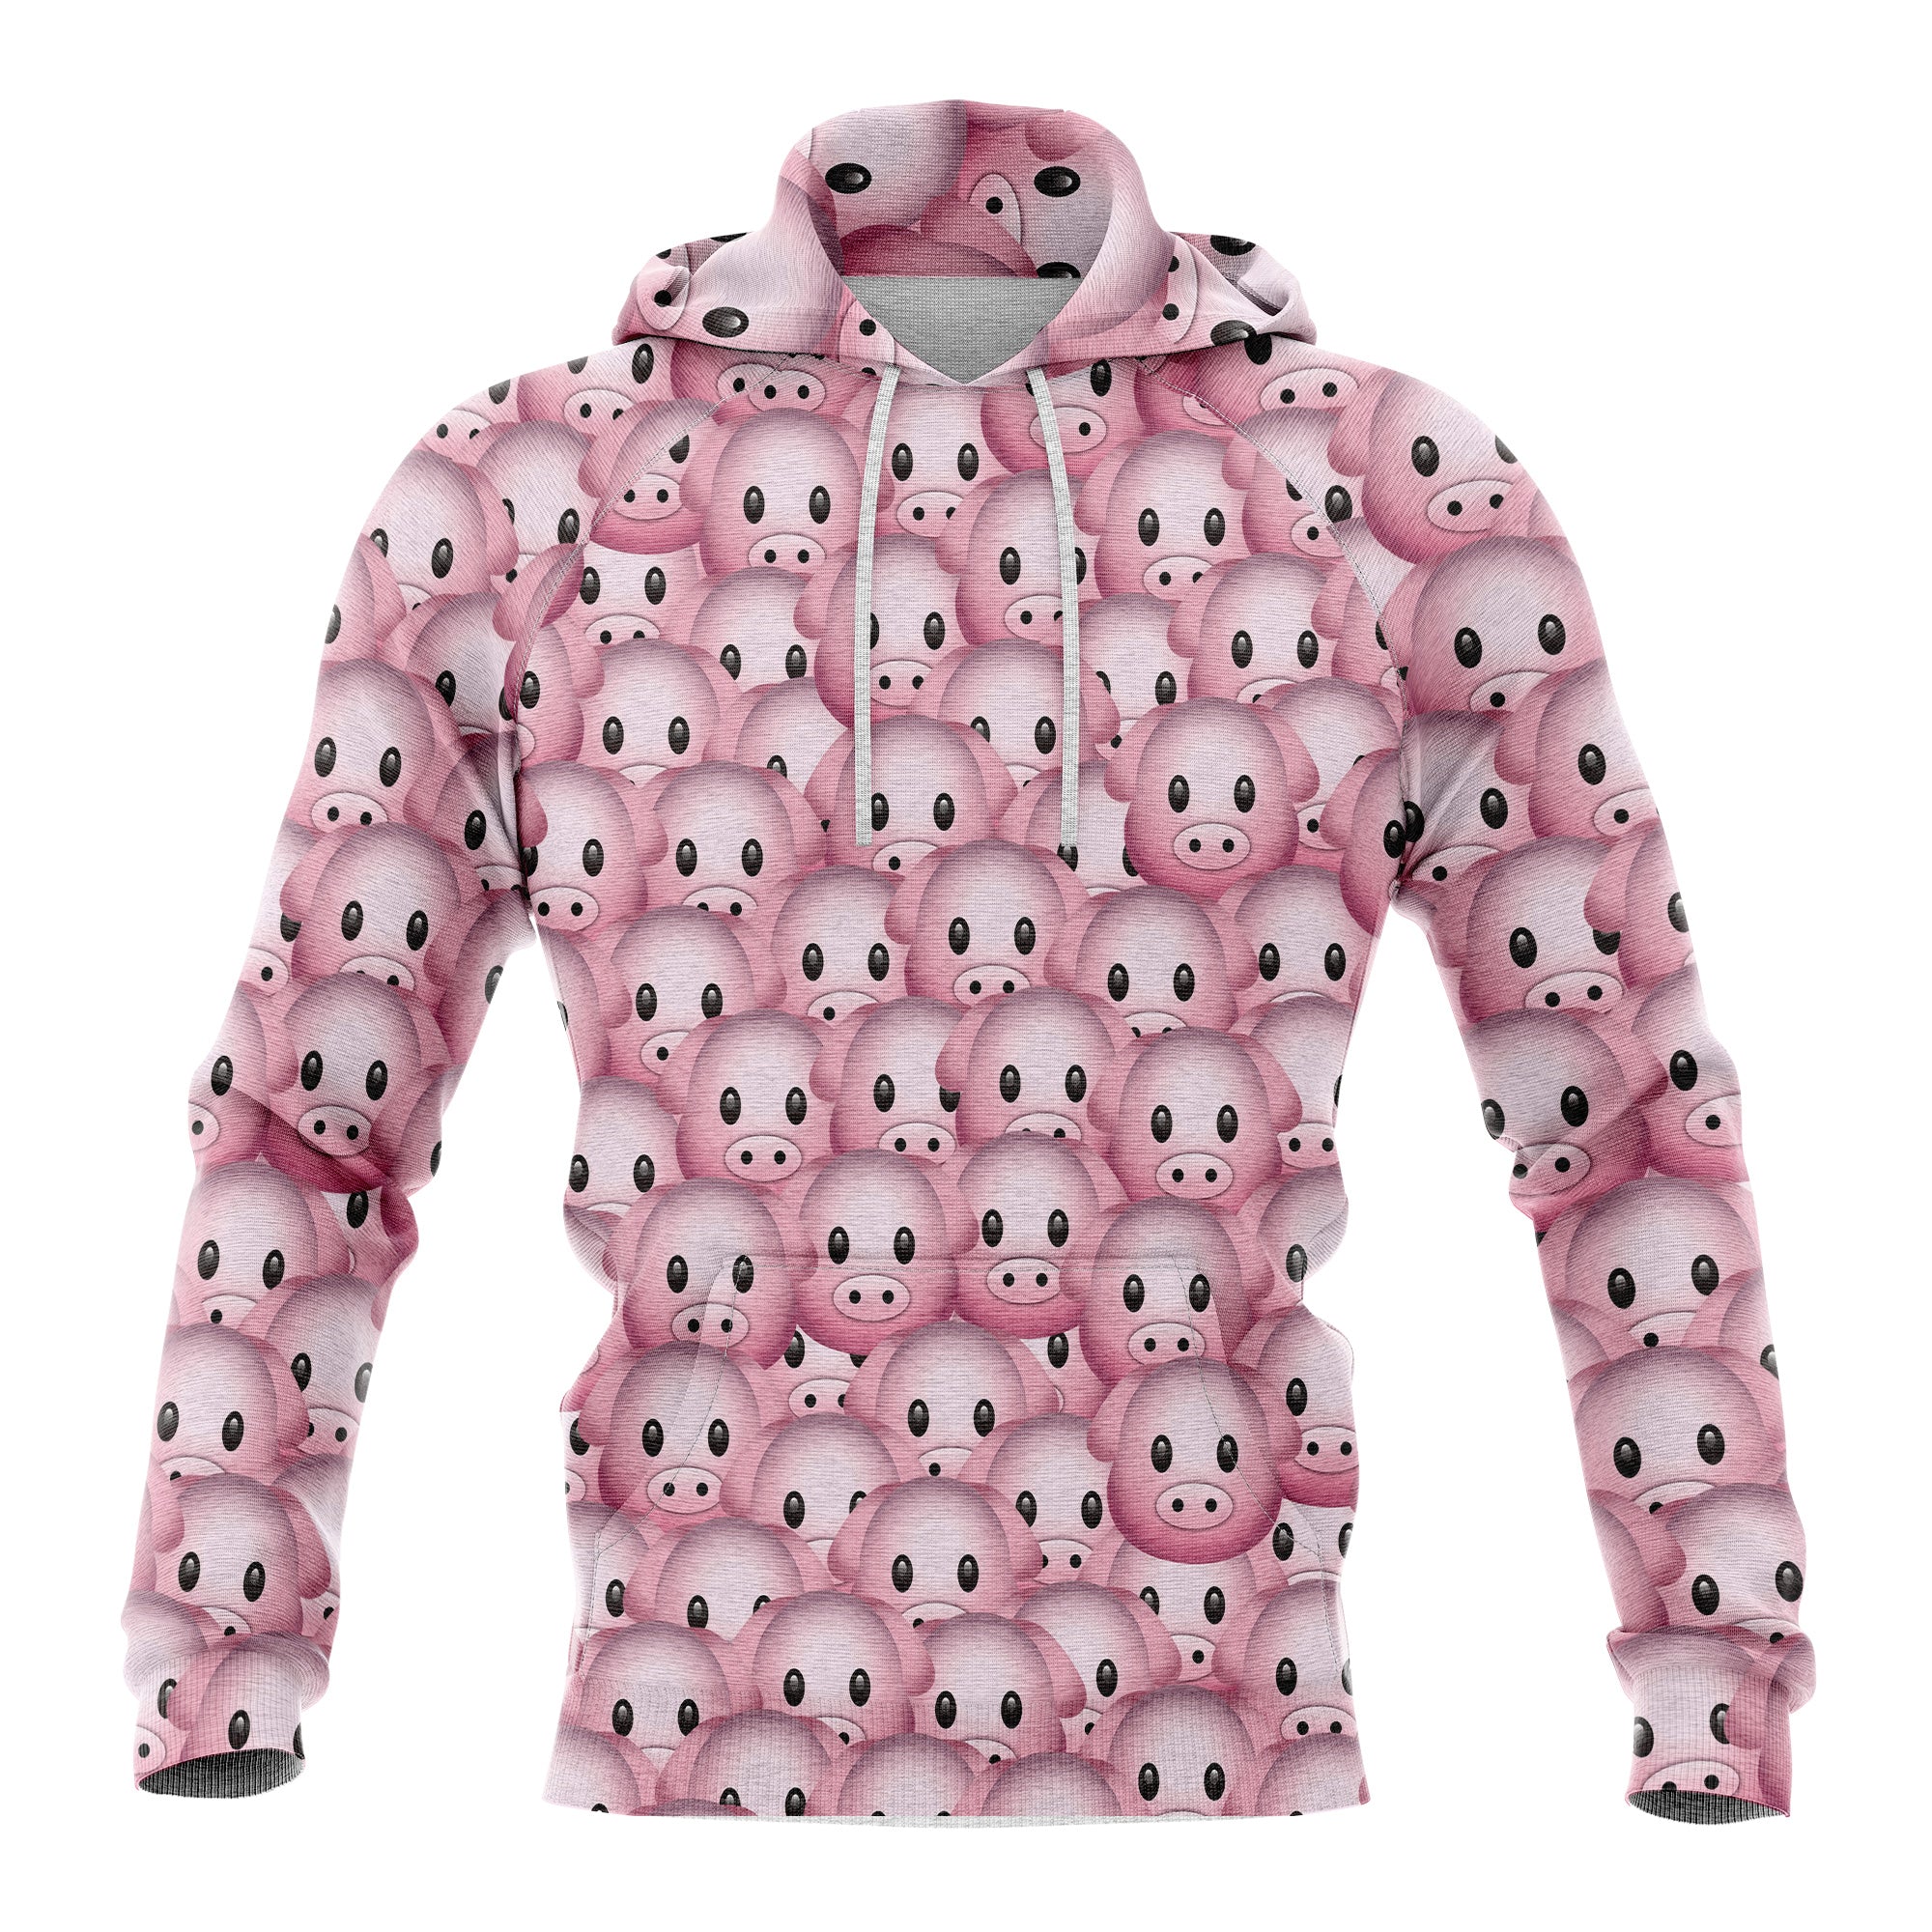 Pig Lover Pullover Premium Hoodie, Perfect Outfit For Men And Women On Christmas New Year Autumn Winter